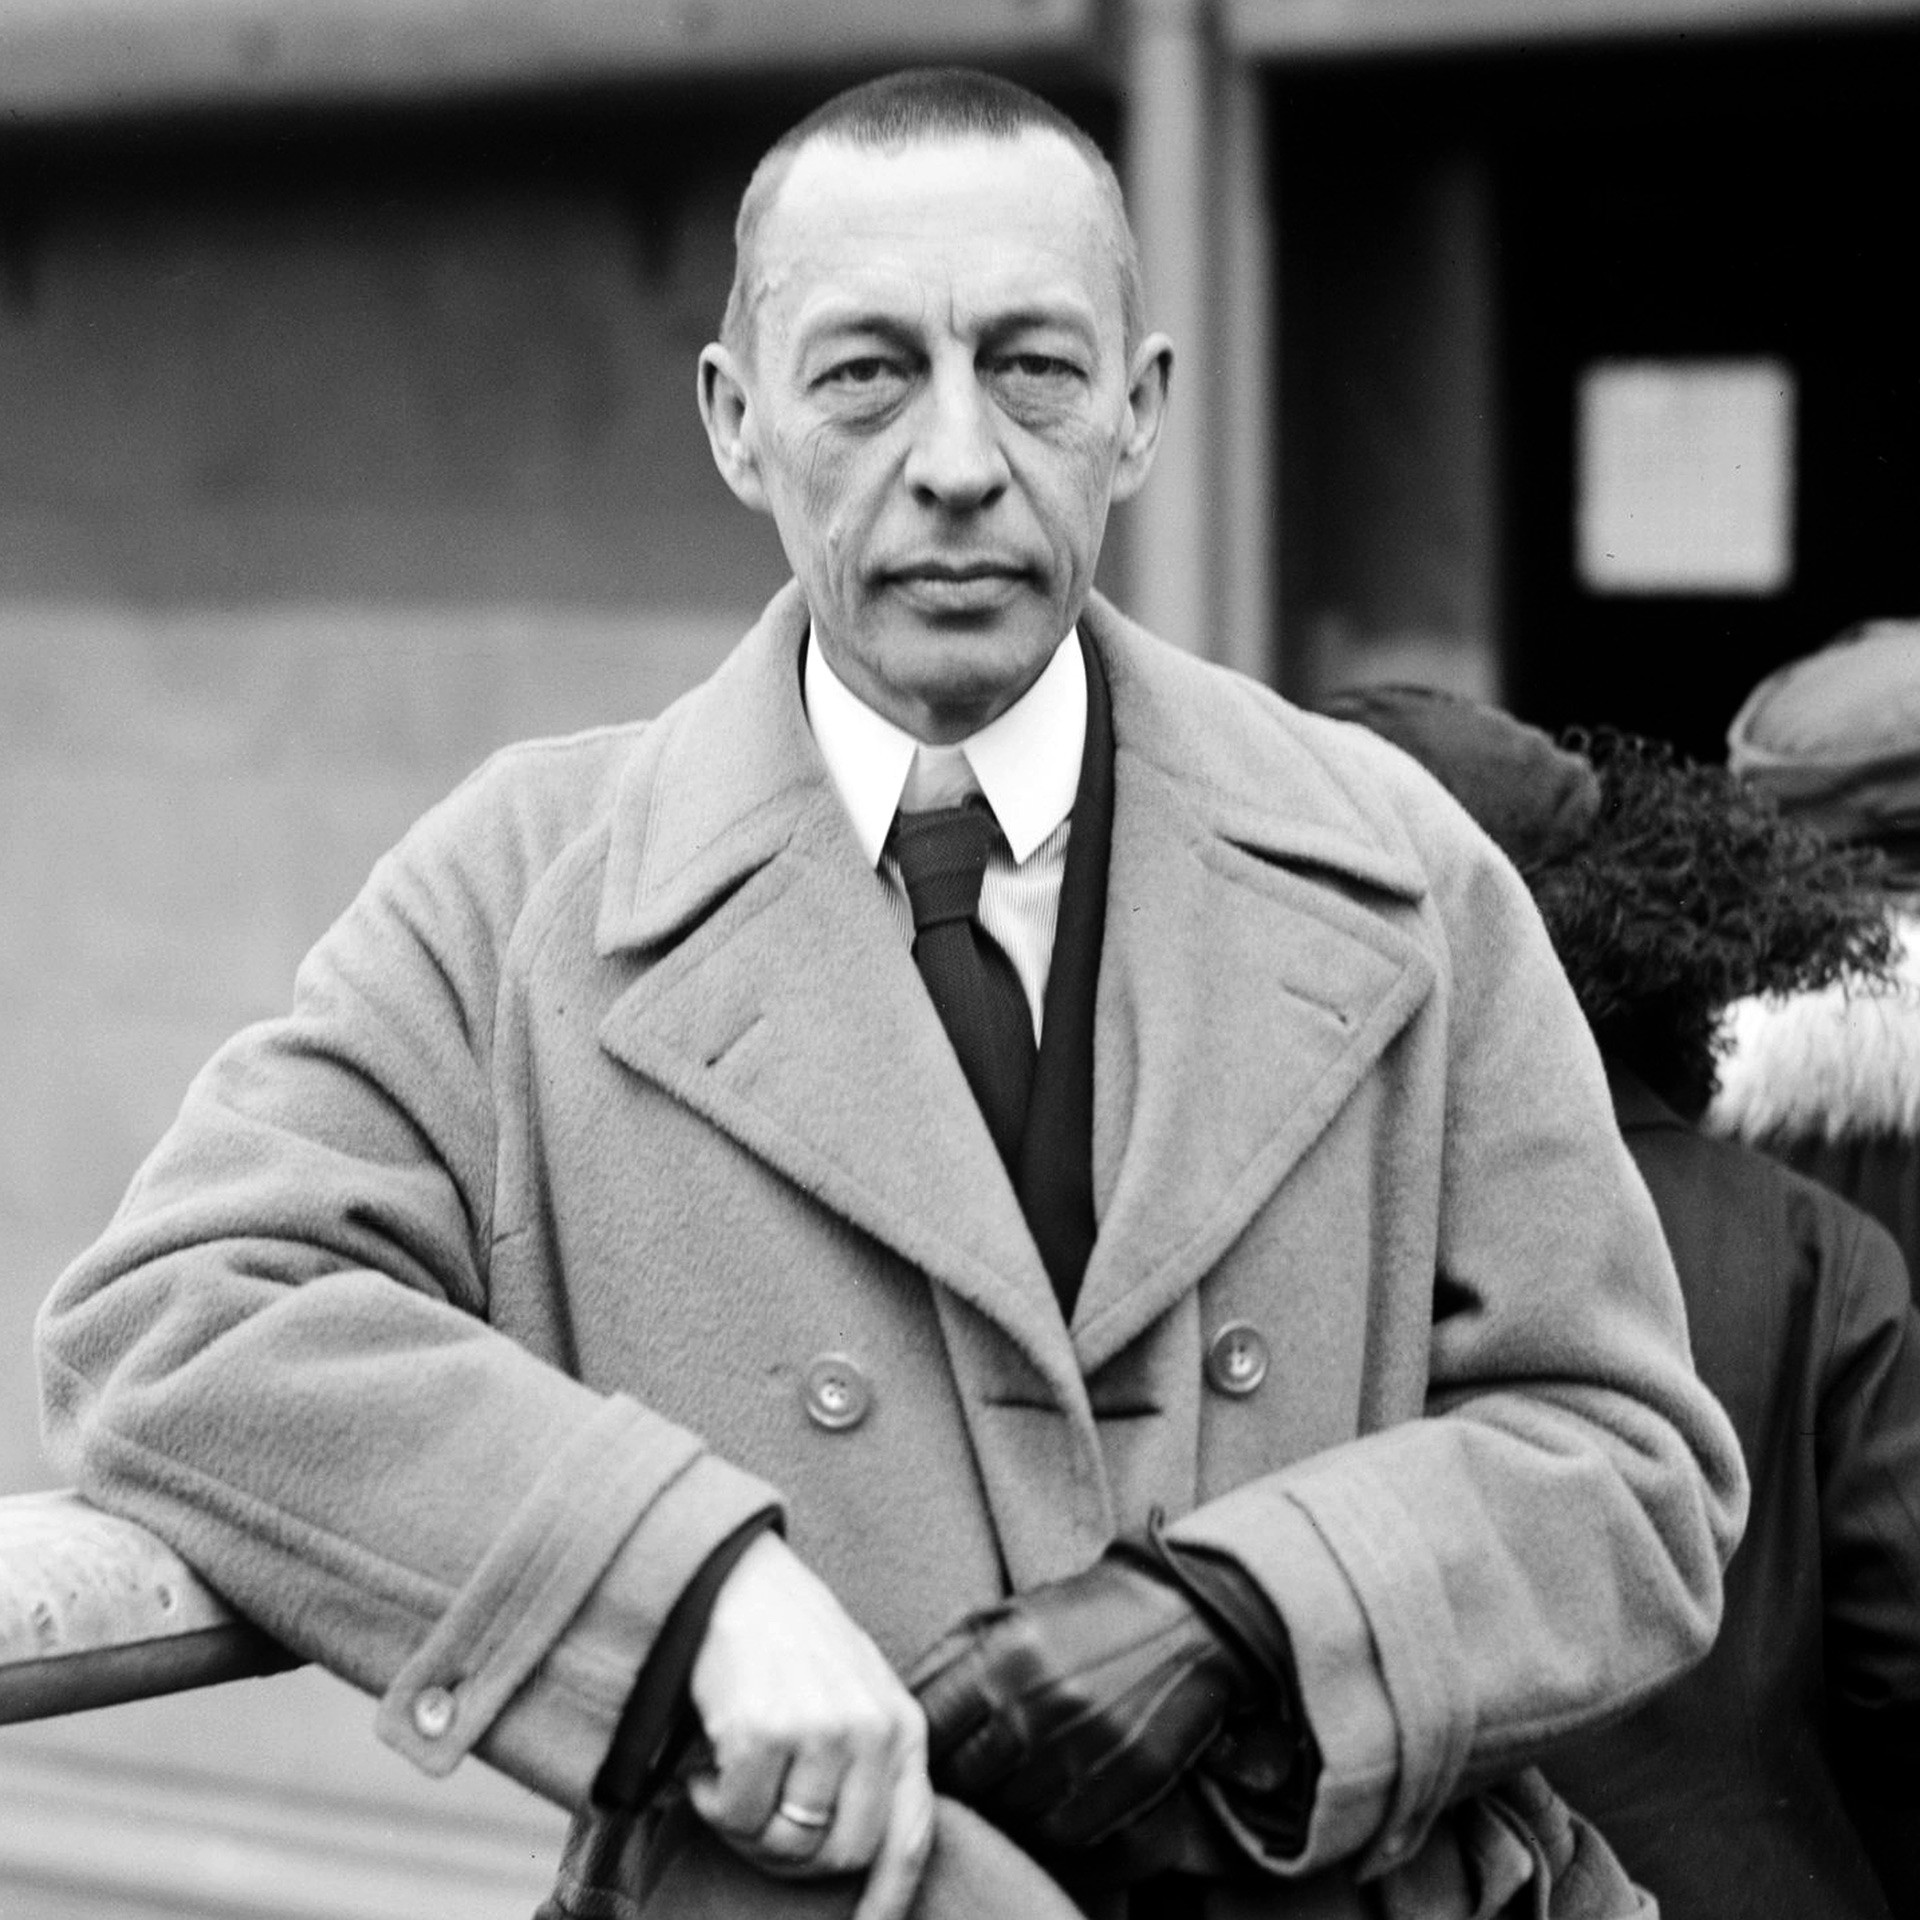 Sergei Rachmaninoff was famous both for his work as a composer and for his outstanding performances as a pianist. After the revolution he remained in great request, but only abroad.  